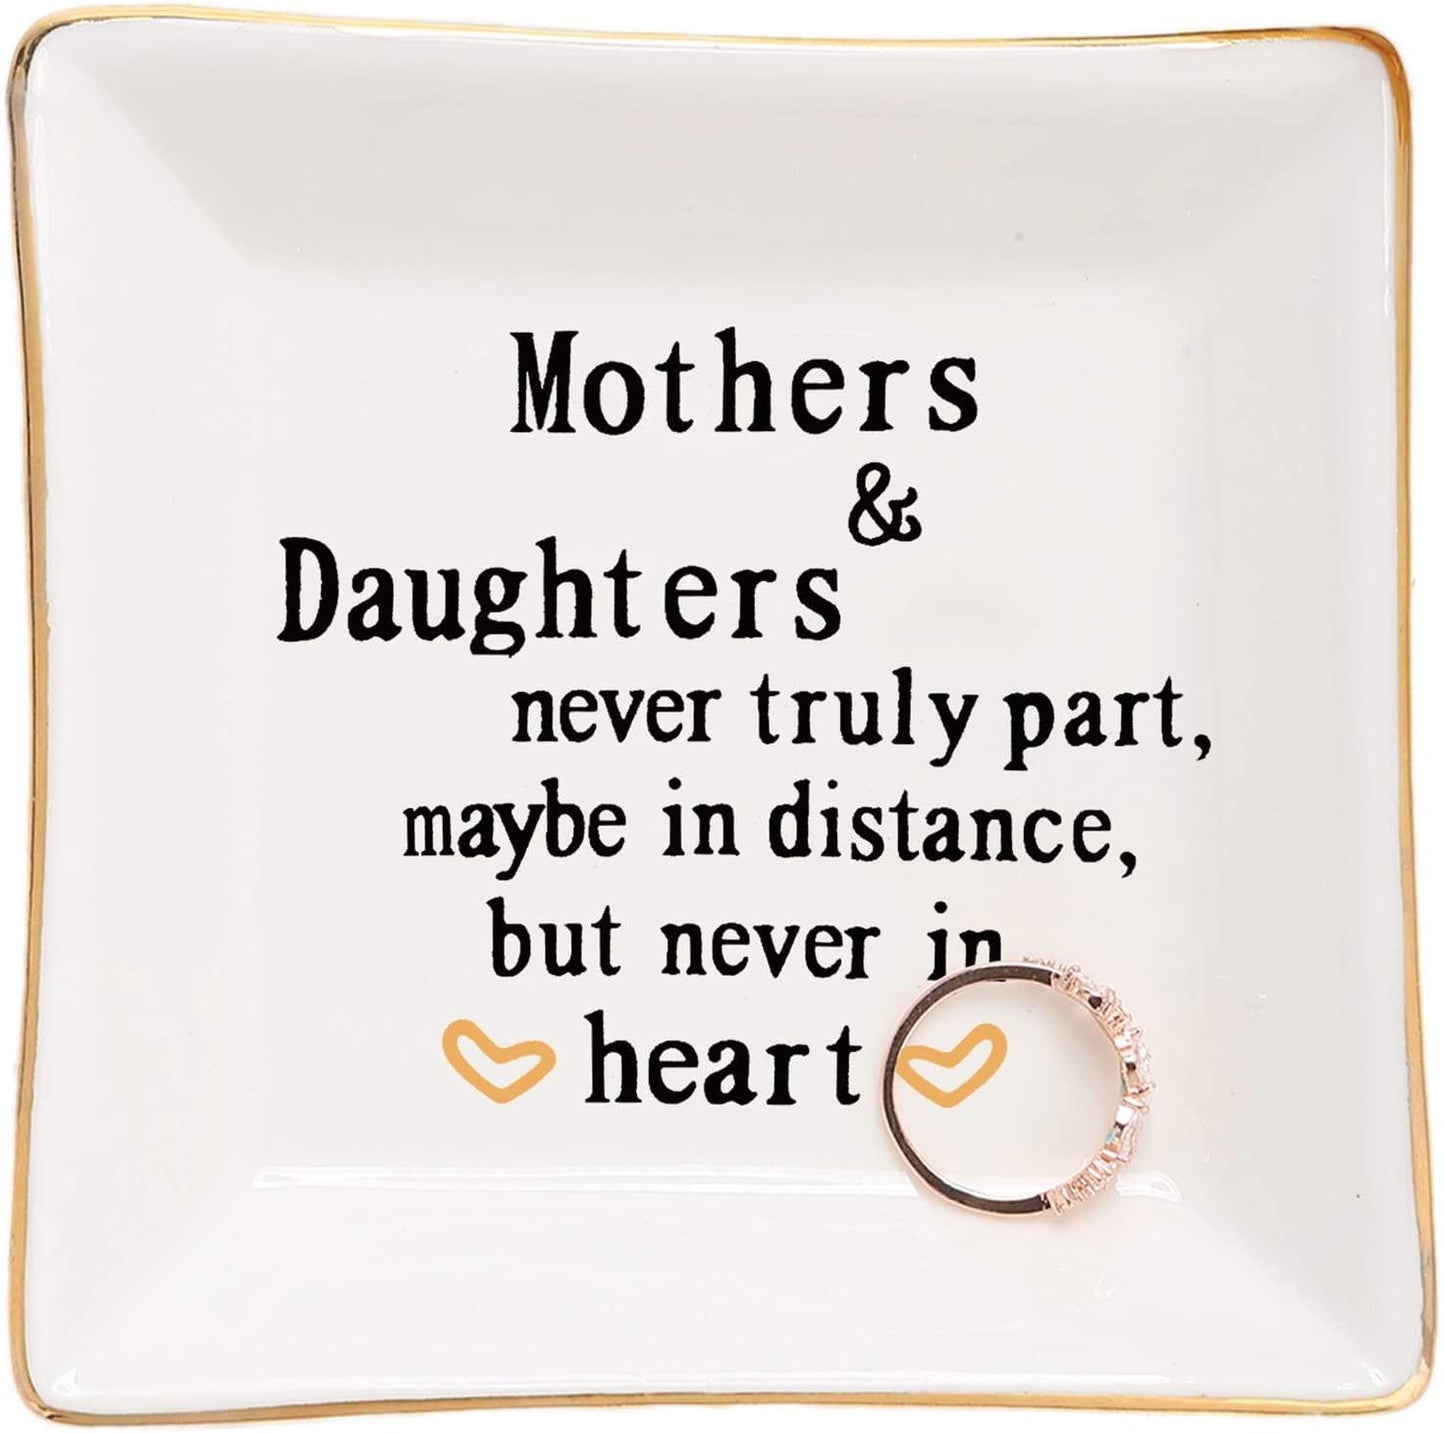 Mom Ceramic Ring Dish Mother's Day Gifts - TheGivenGet